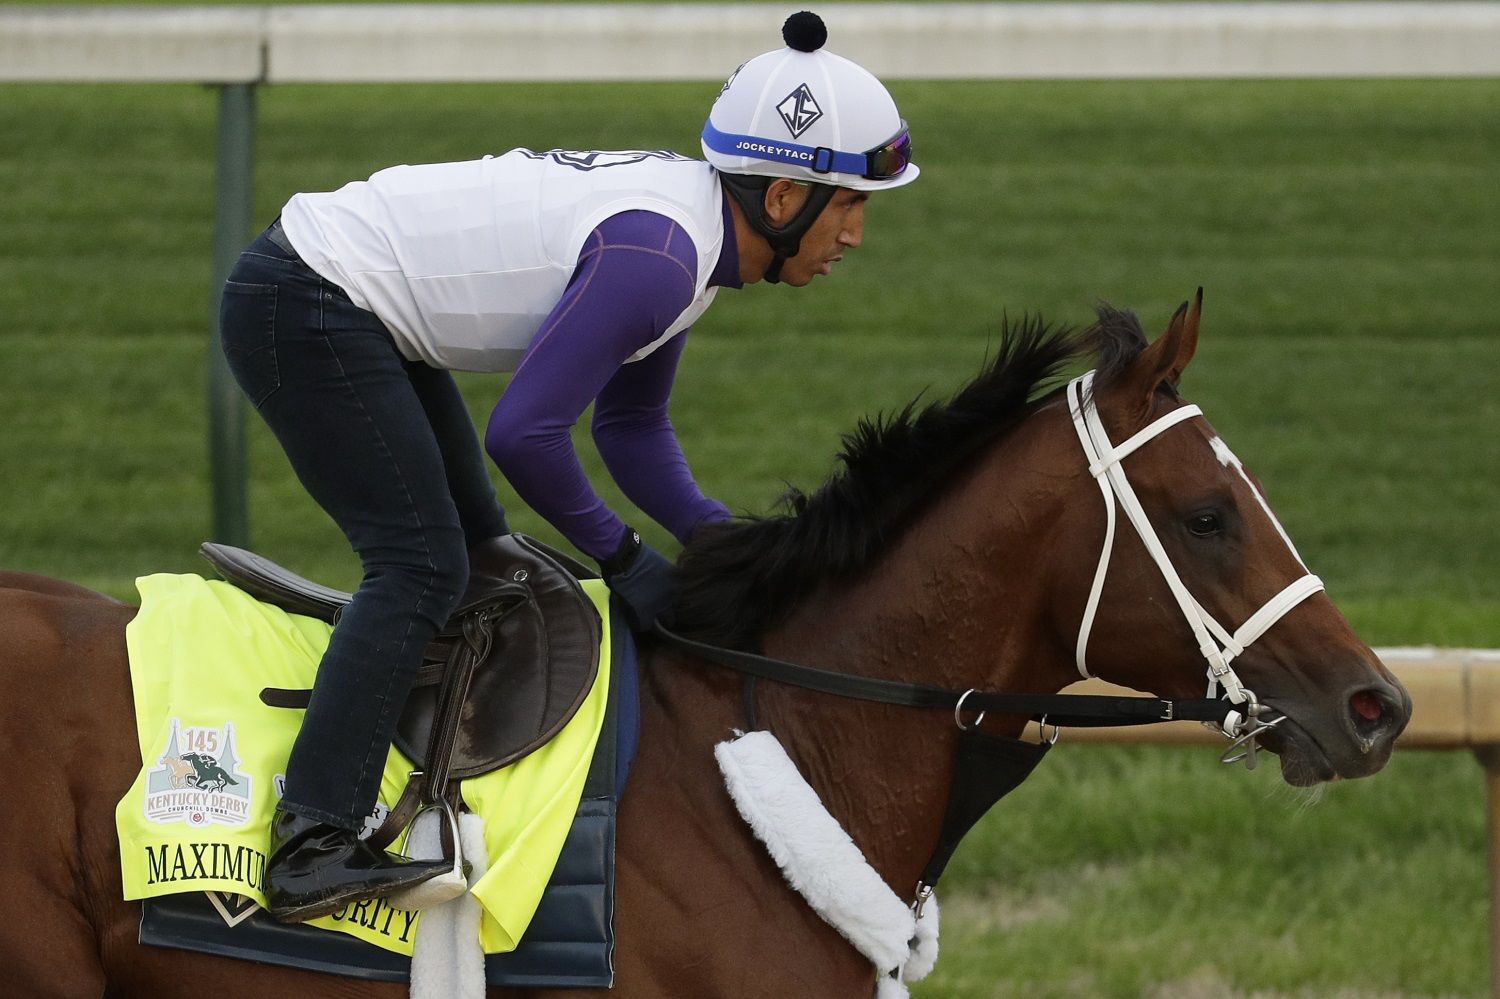 Kentucky Derby entrant Maximum Security is ridden during a workout at Churchill Downs Wednesday, May 1, 2019, in Louisville, Ky. The 145th running of the Kentucky Derby is scheduled for Saturday, May 4. (AP Photo/Charlie Riedel)